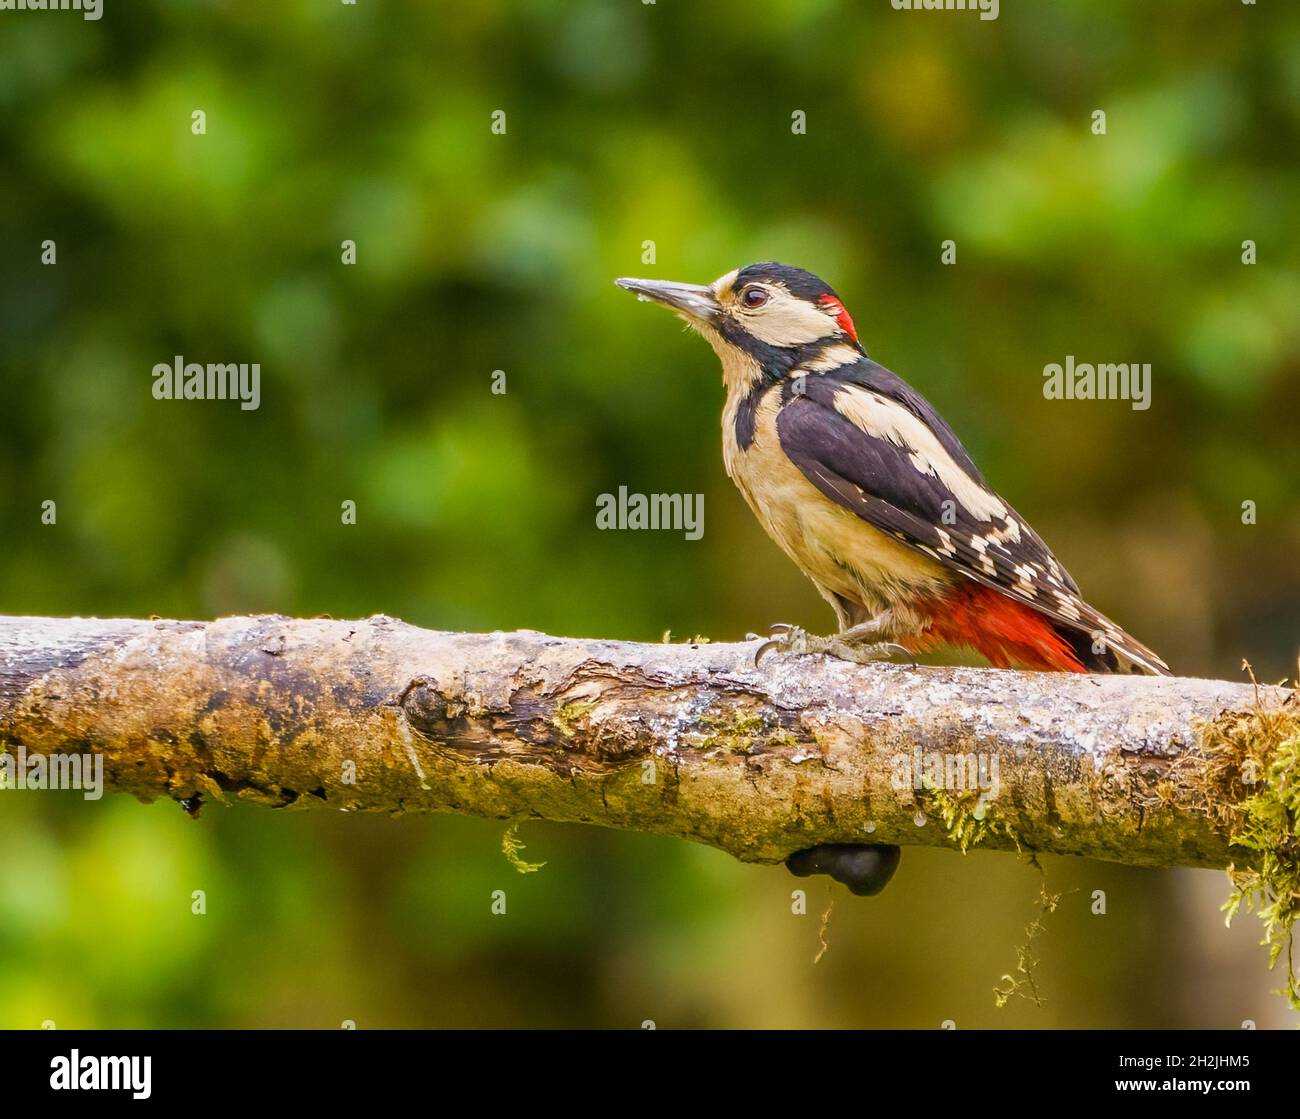 Male Great Spotted Woodpecker at Rest in Cotswolds,UK Garden Stock Photo